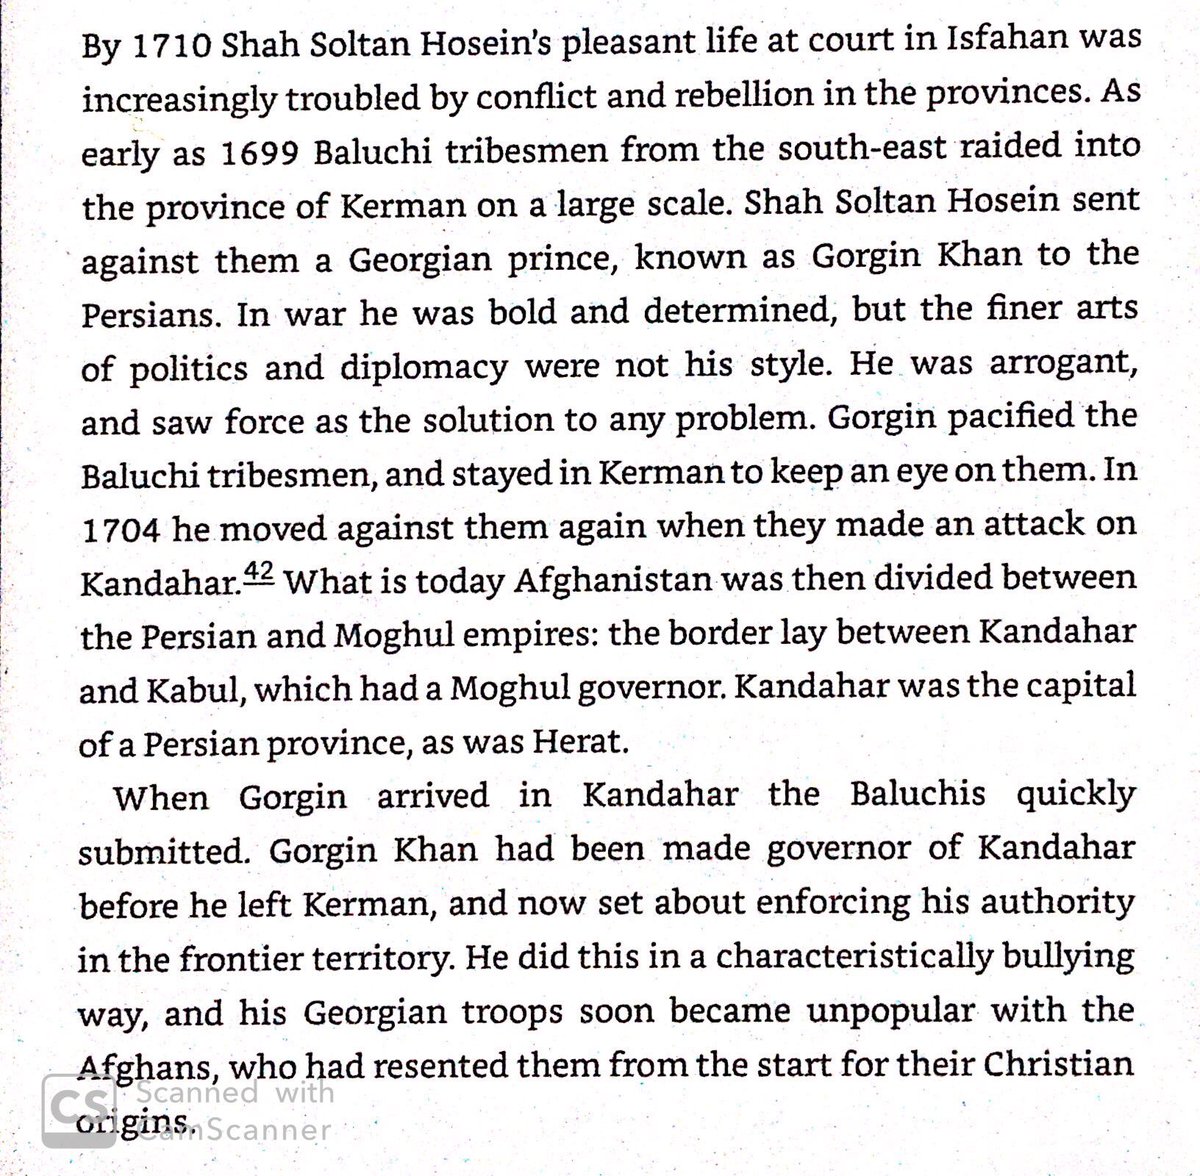 Safavids suffered from serious urban unrest by 1710. Lezgin, Baluchi, & Afghan tribesmen raided Iran. Naturally, central authority declined & local leaders asserted themselves.